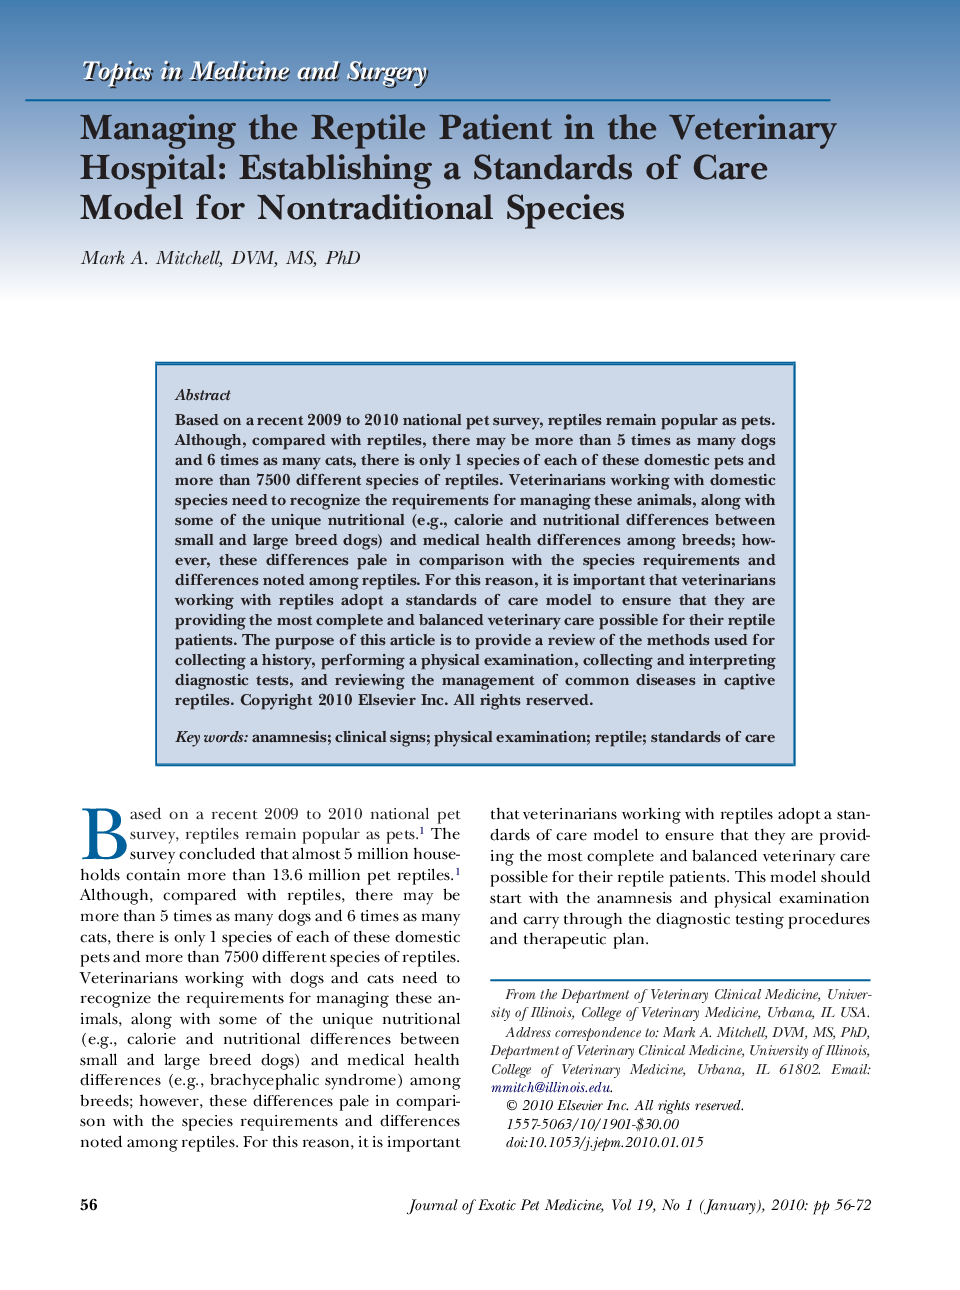 Managing the Reptile Patient in the Veterinary Hospital: Establishing a Standards of Care Model for Nontraditional Species